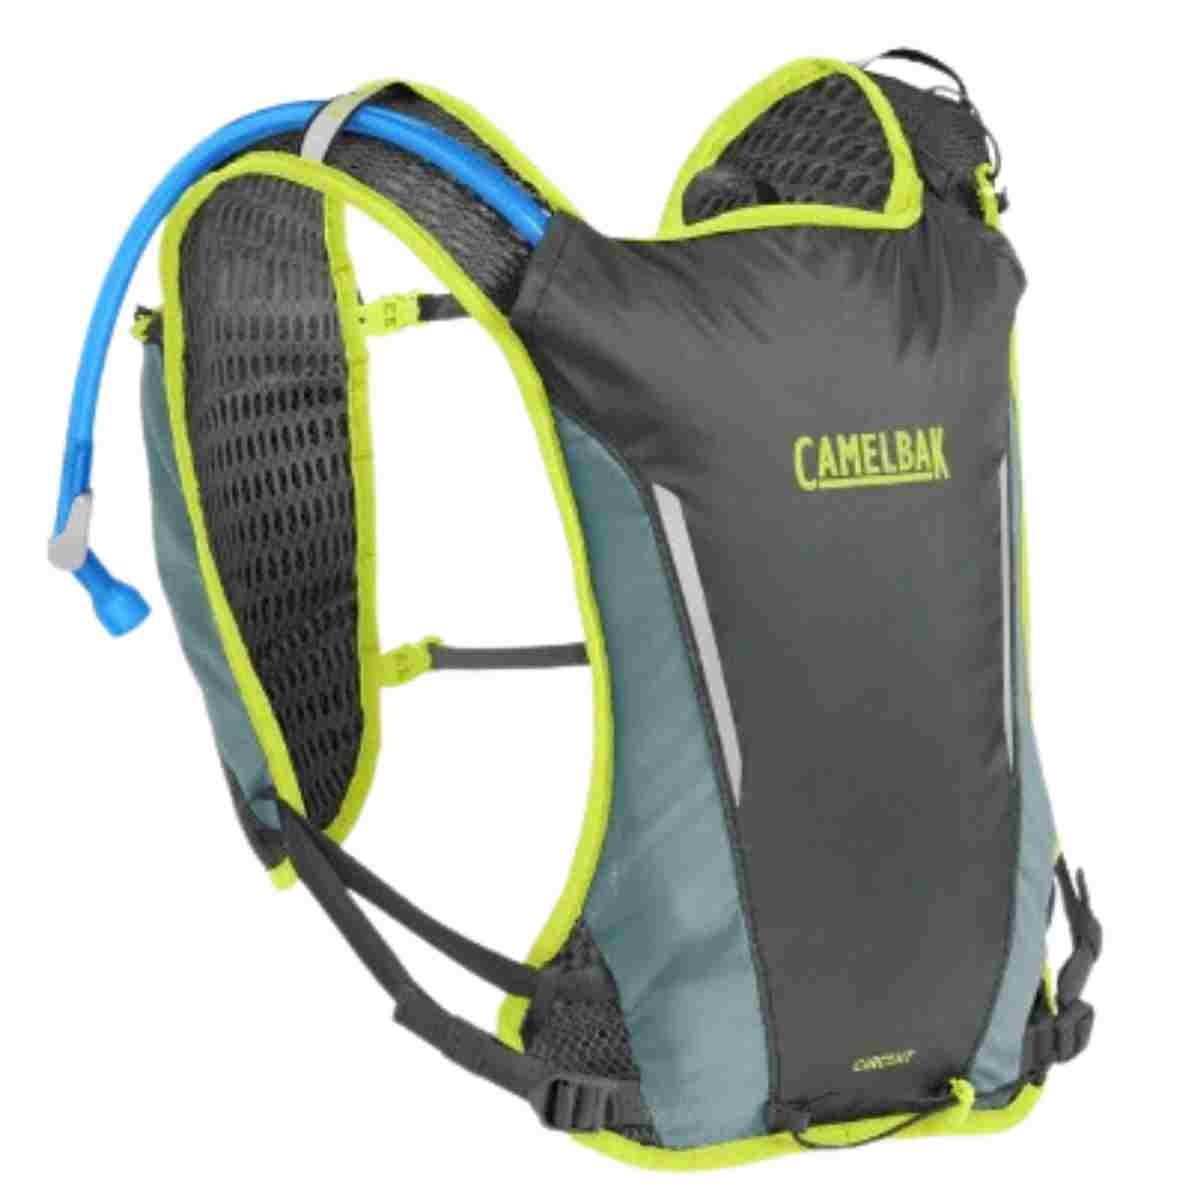 How to Choose a Hydration Vest - The Runners Edge